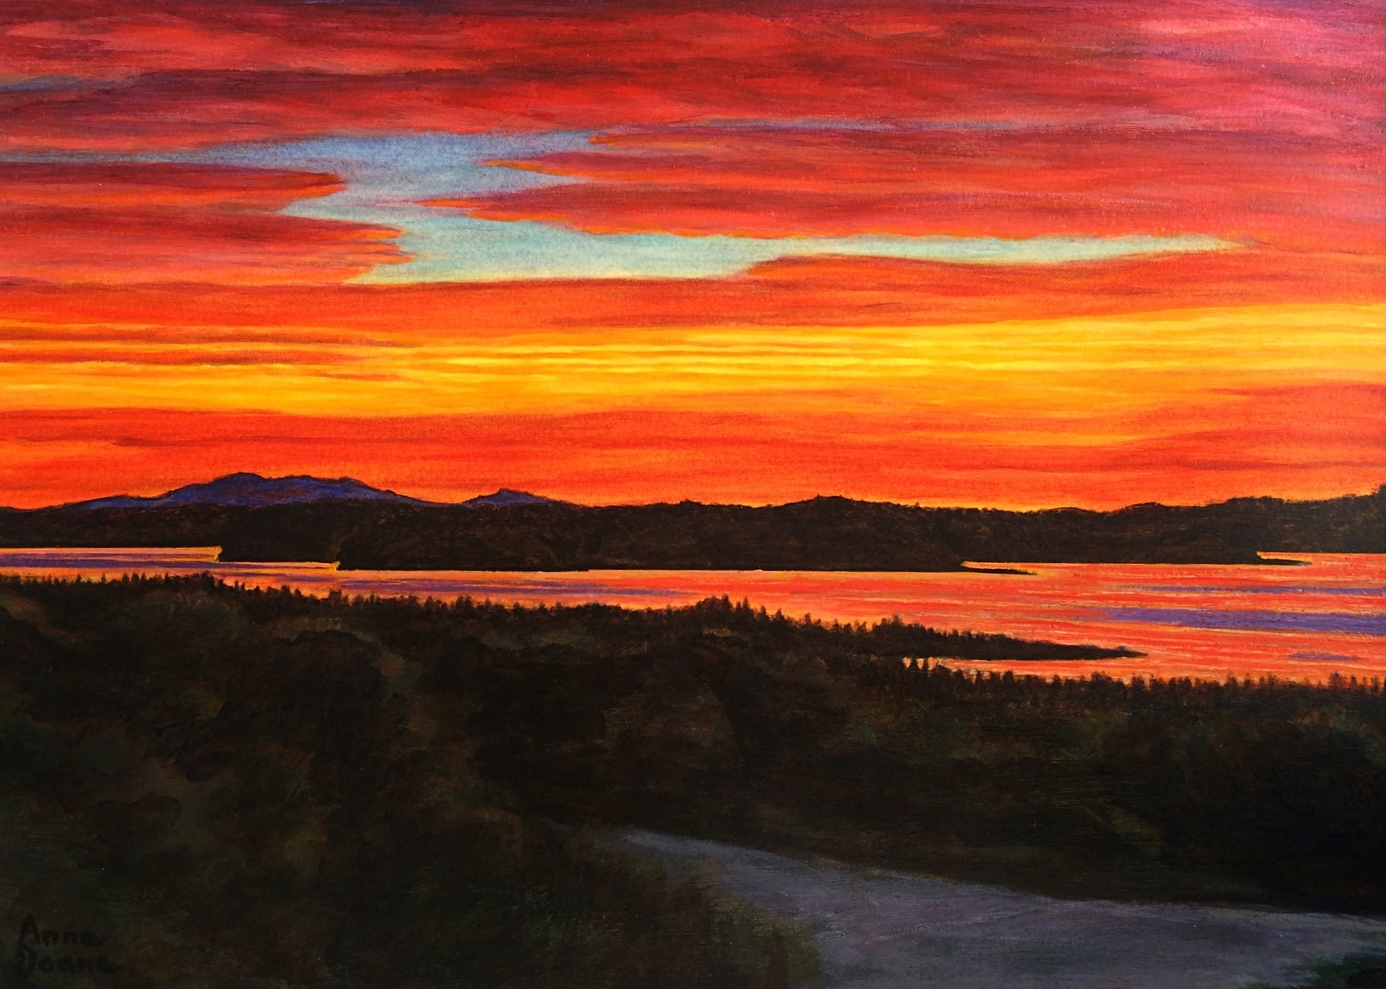 sunset-over-chambers-bay-acrylic-on-paper-by-anne-doane-1400.jpg